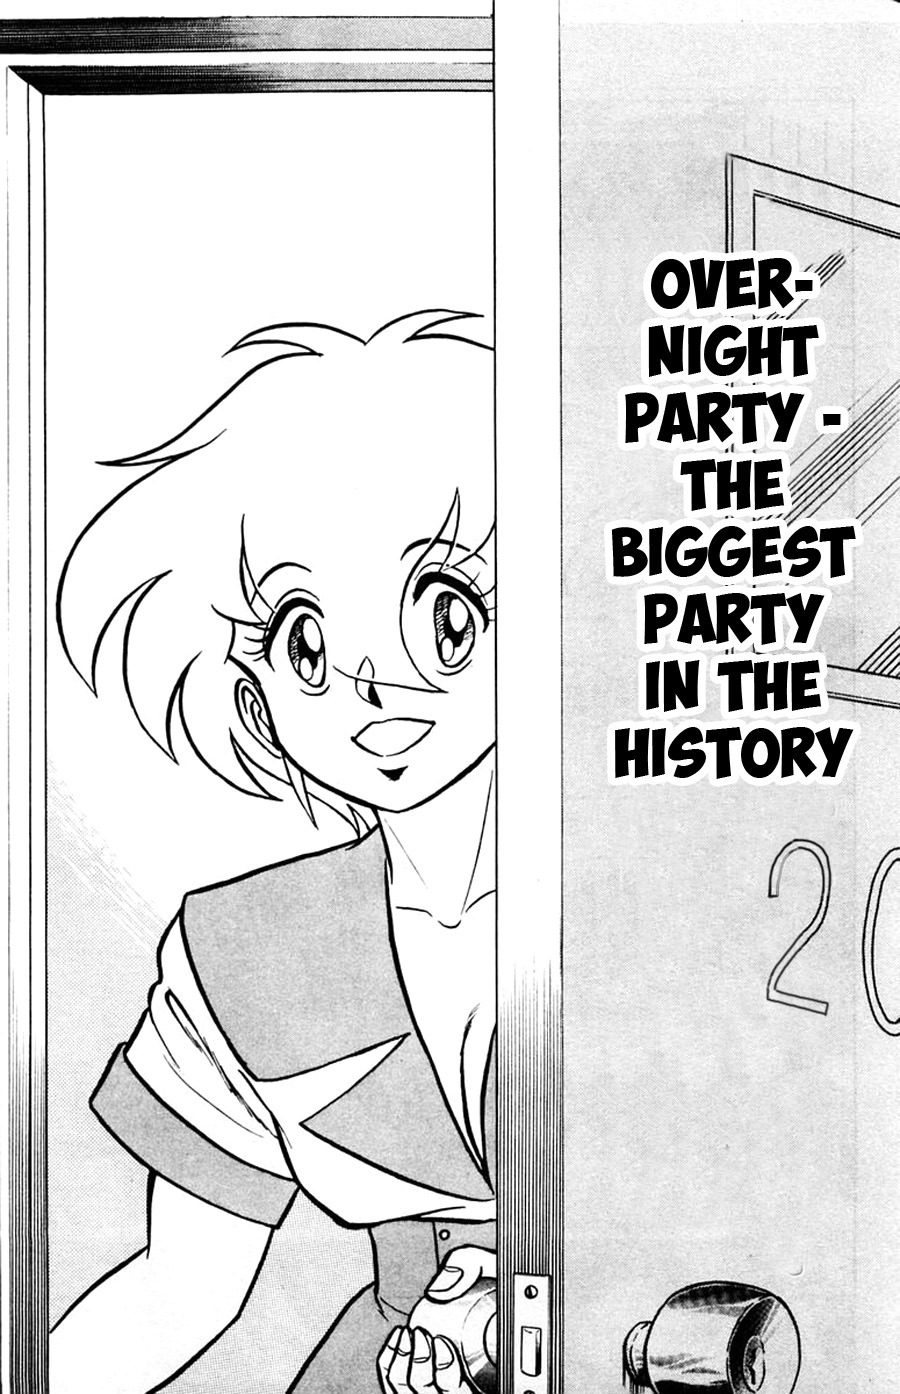 Yuu & Mii Vol. 8 Ch. 46 Overnight Party The Biggest Party in the History